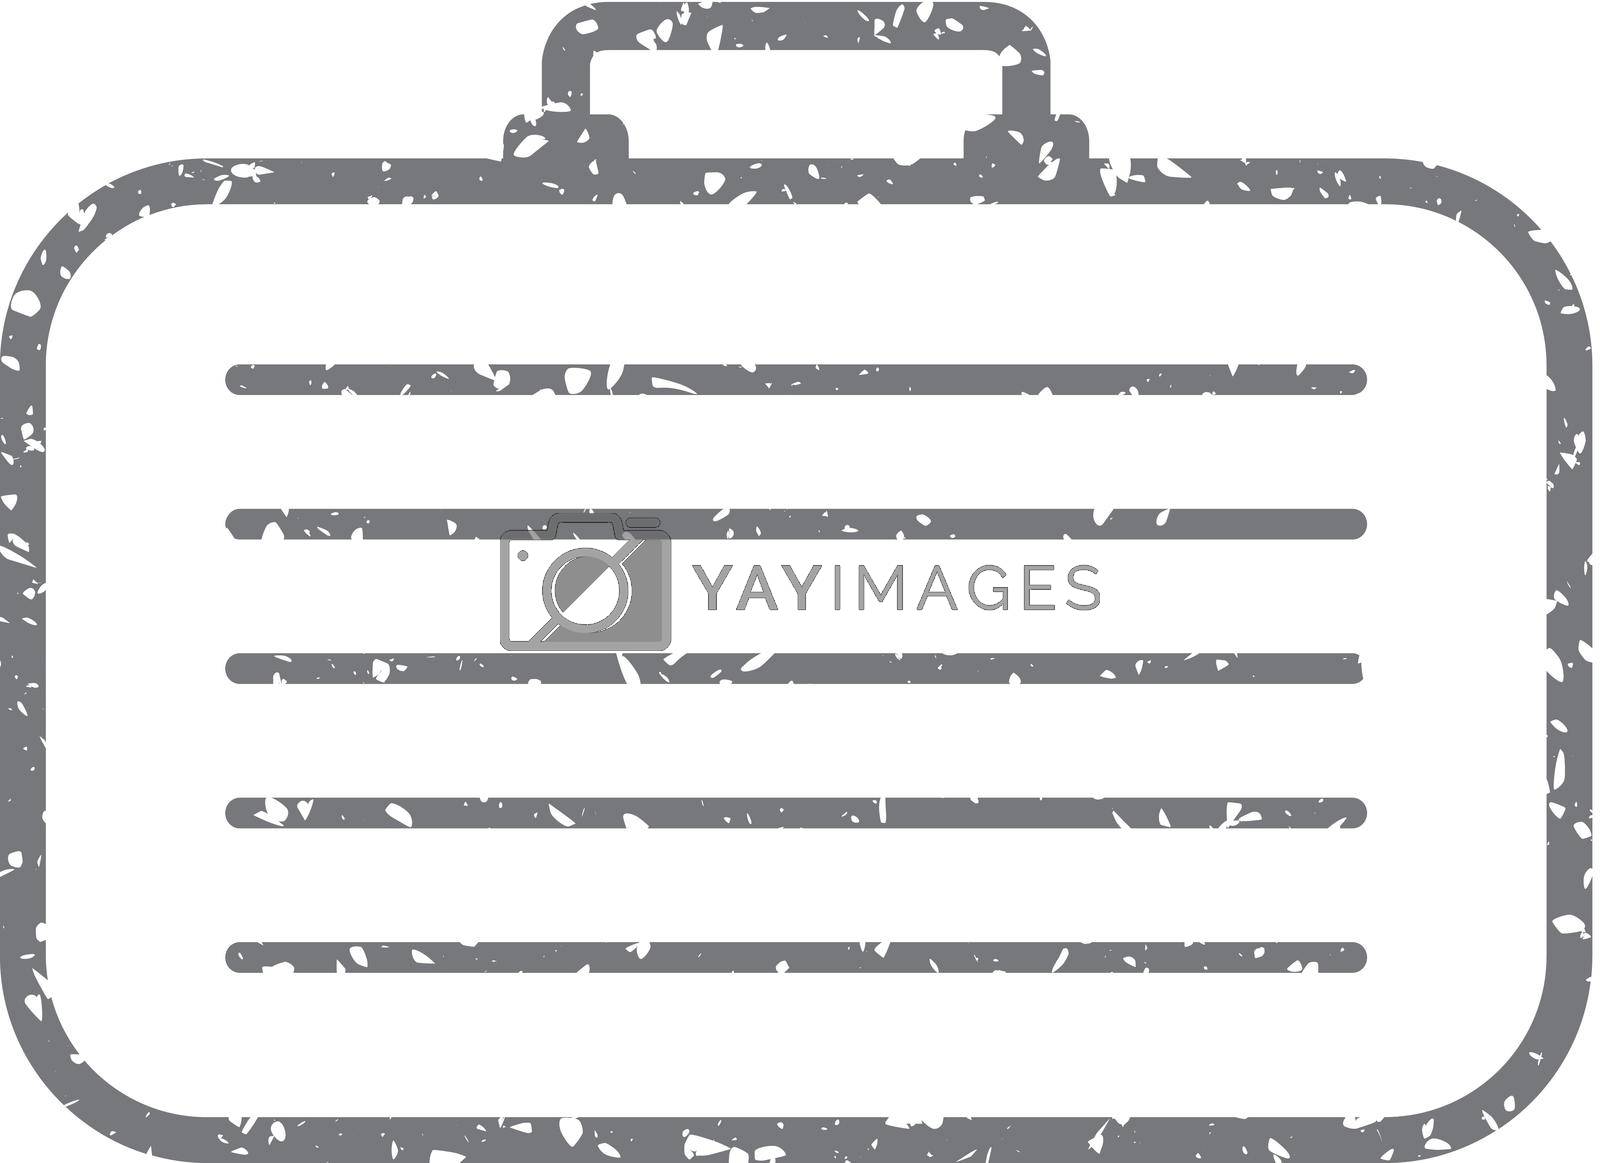 Traveling suitcase icon in grunge texture. Vintage style vector illustration.